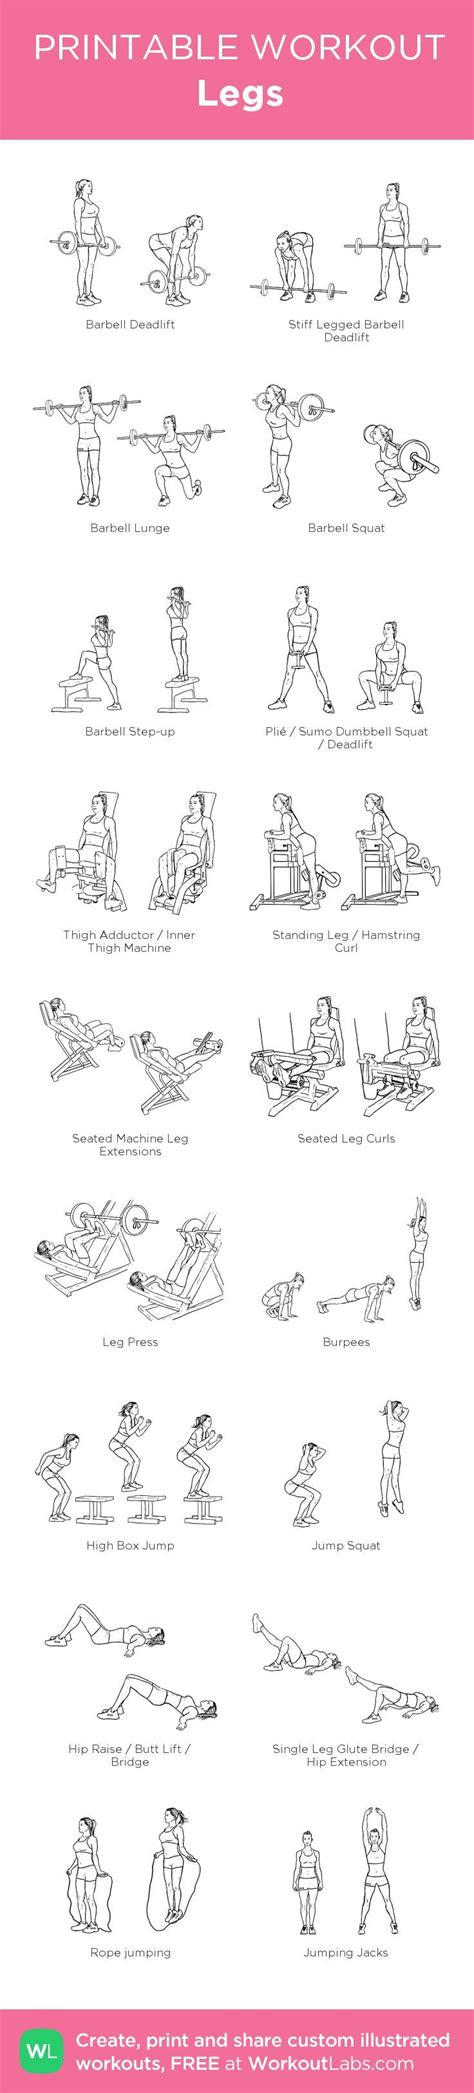 This table shows major muscles and the exercises used to work and strengthen that muscle. Legs: my custom printable workout by @WorkoutLabs # ...